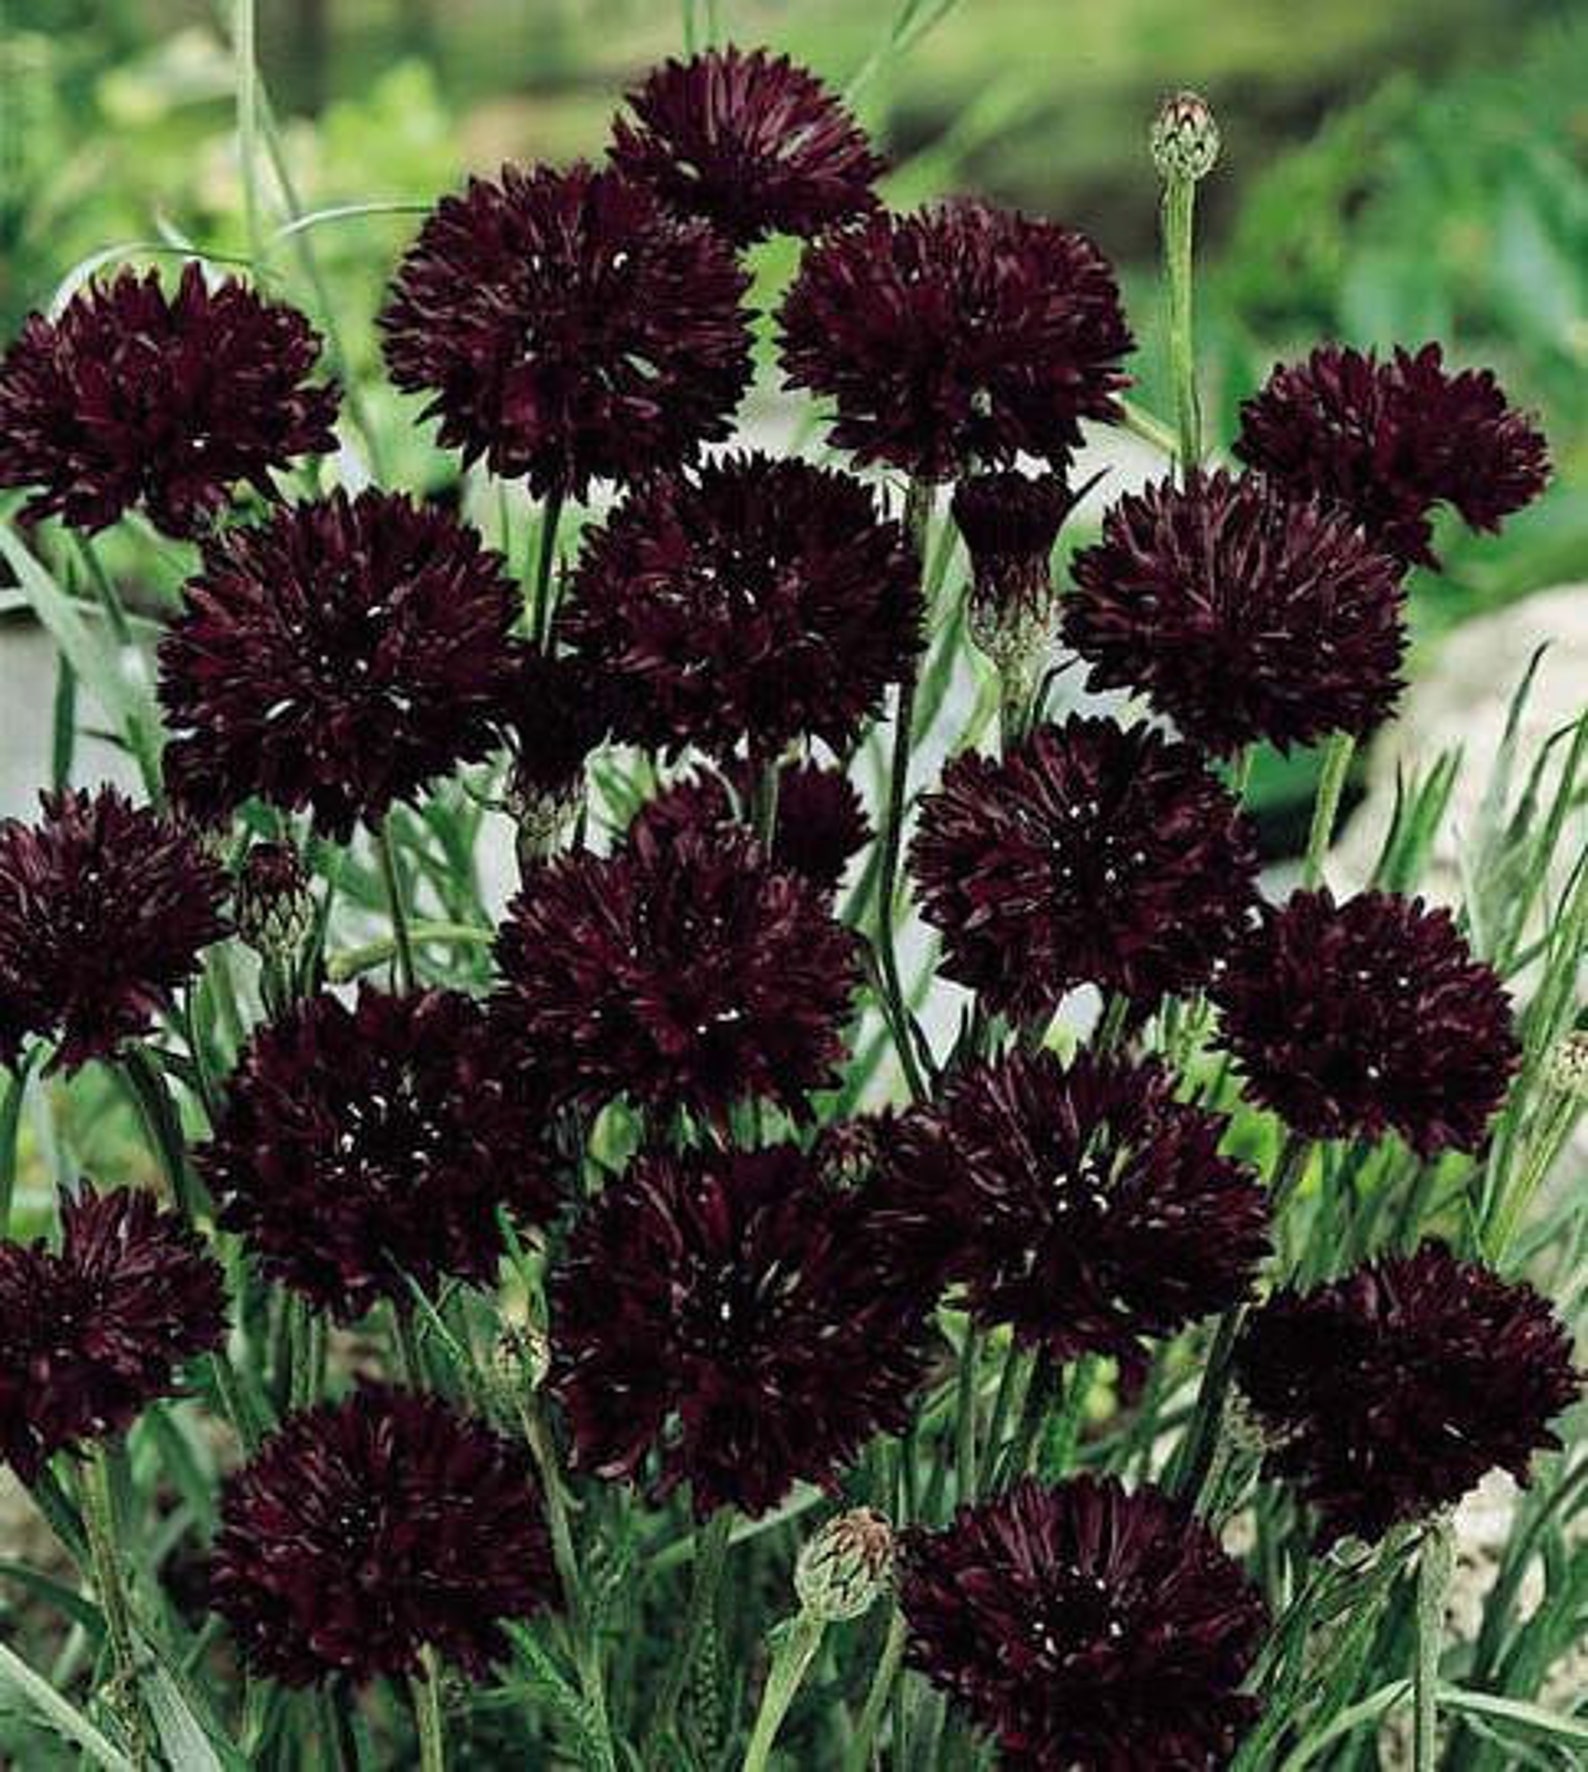 100 Black Bachelors Button Seeds - Etsy